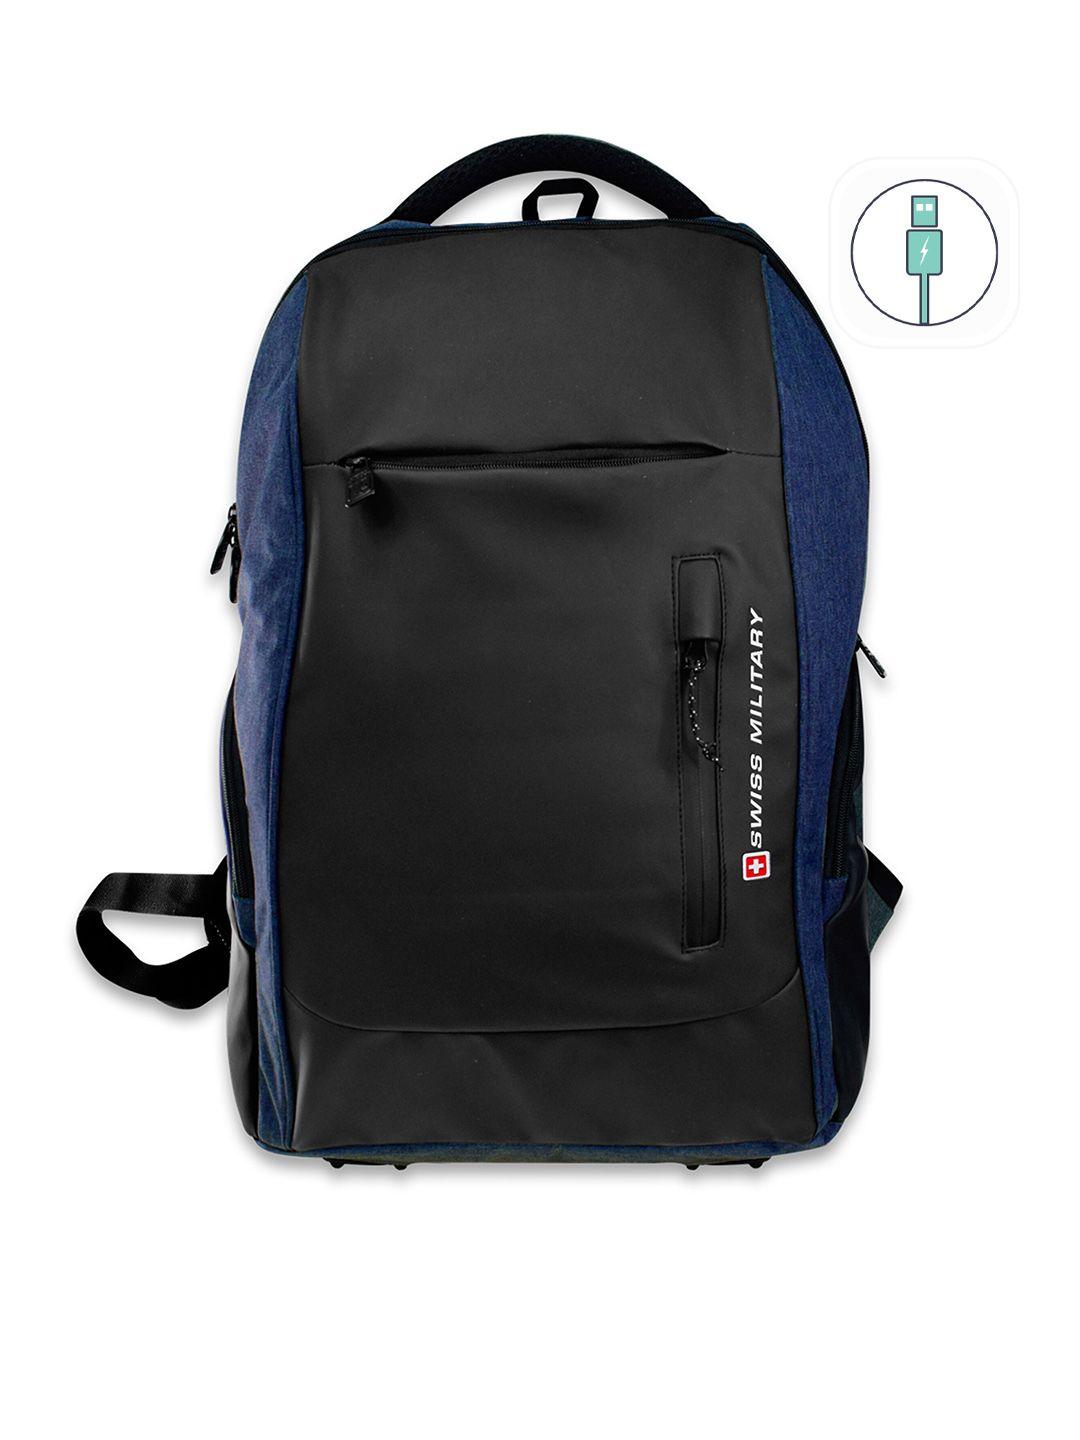 swiss military unisex black & blue brand logo backpack with usb charging port